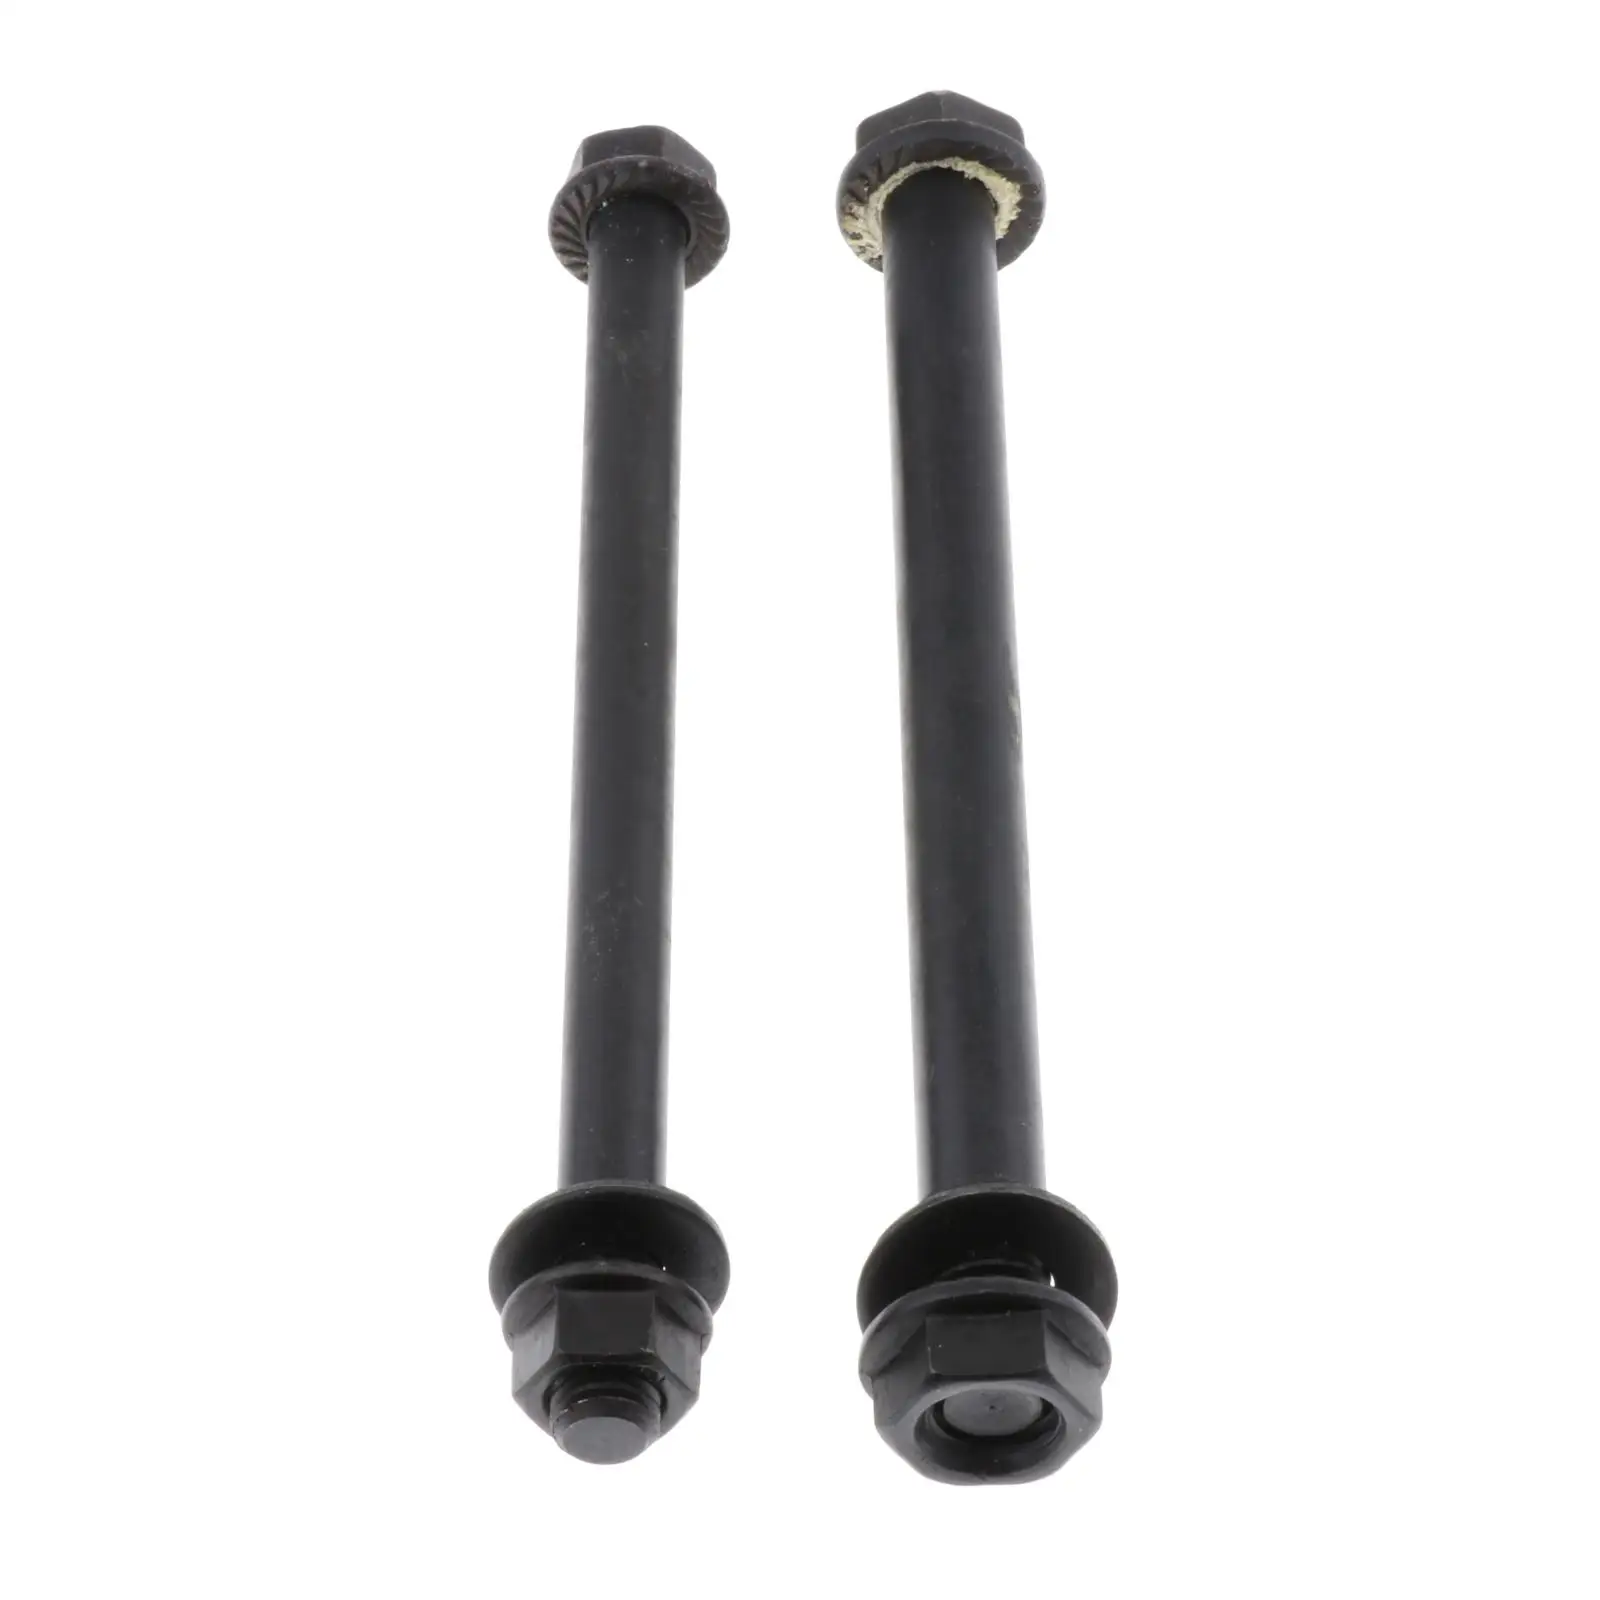 2x Rear Bearing Carrier Bolts and Nuts Set, Suitable for  Banshee 1989-2006 Parts Black, Easy to Install